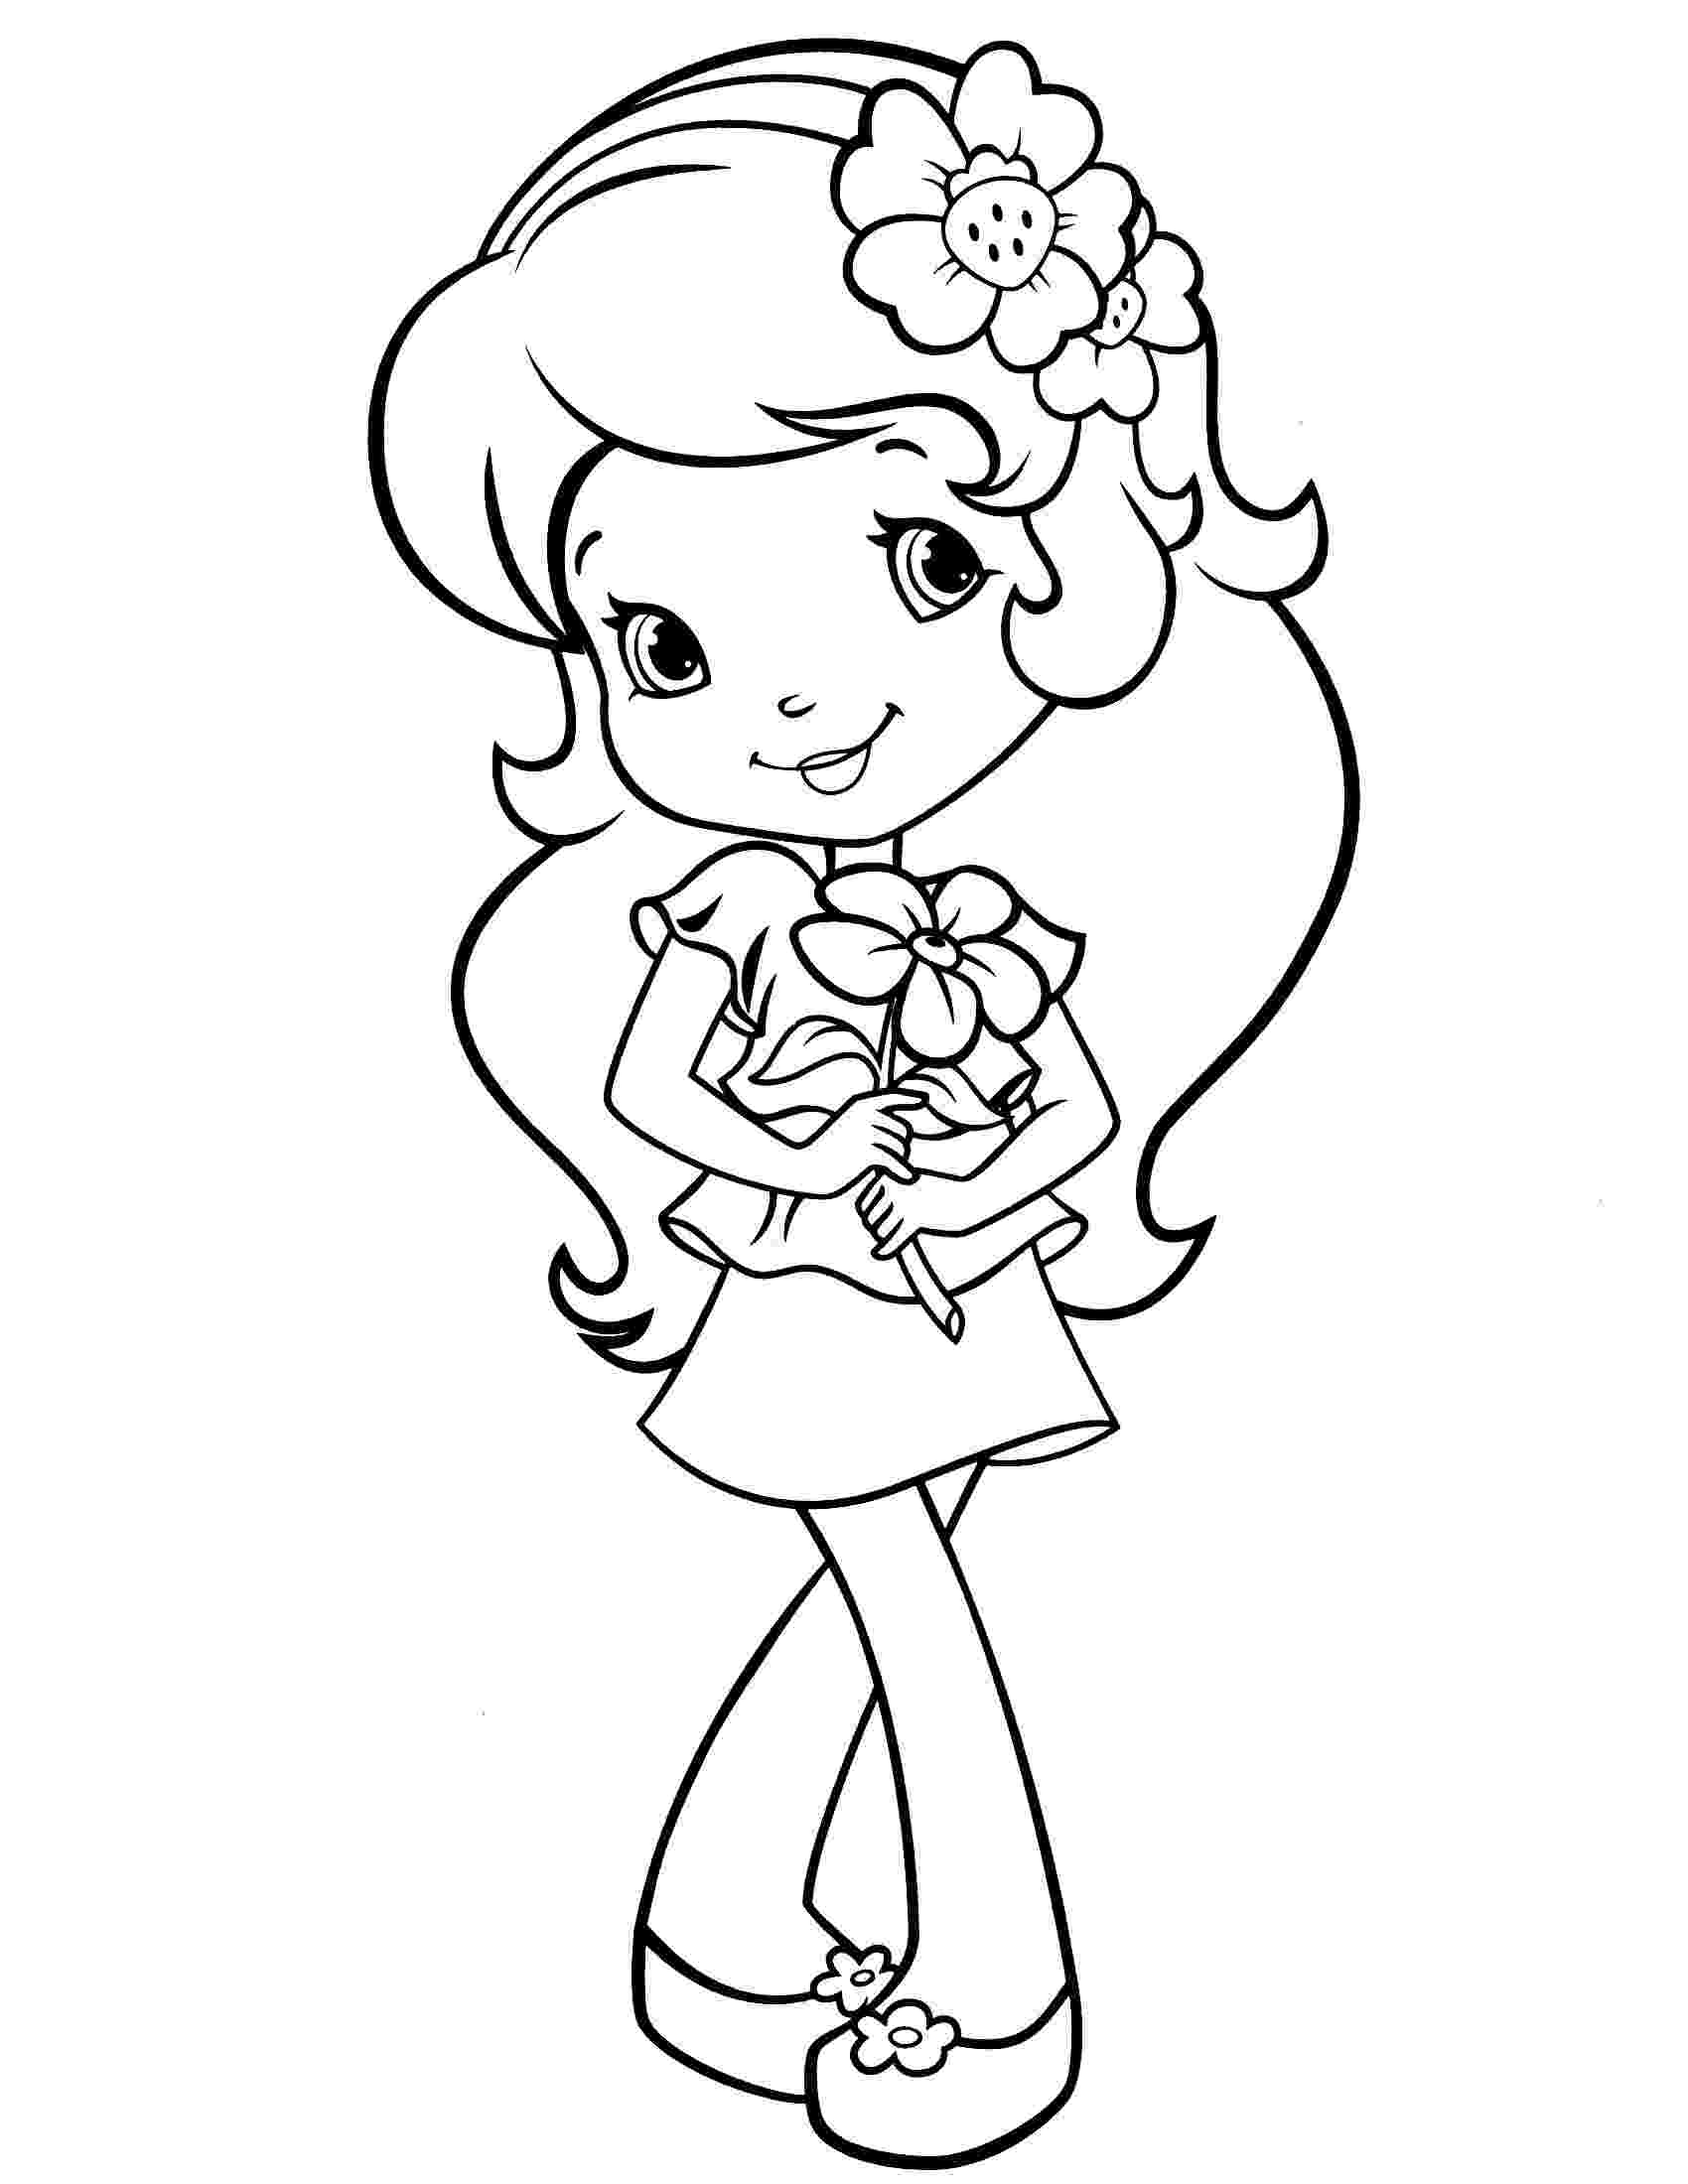 strawberry shortcake colouring pictures strawberry shortcake coloring page dibujos de pictures strawberry colouring shortcake 